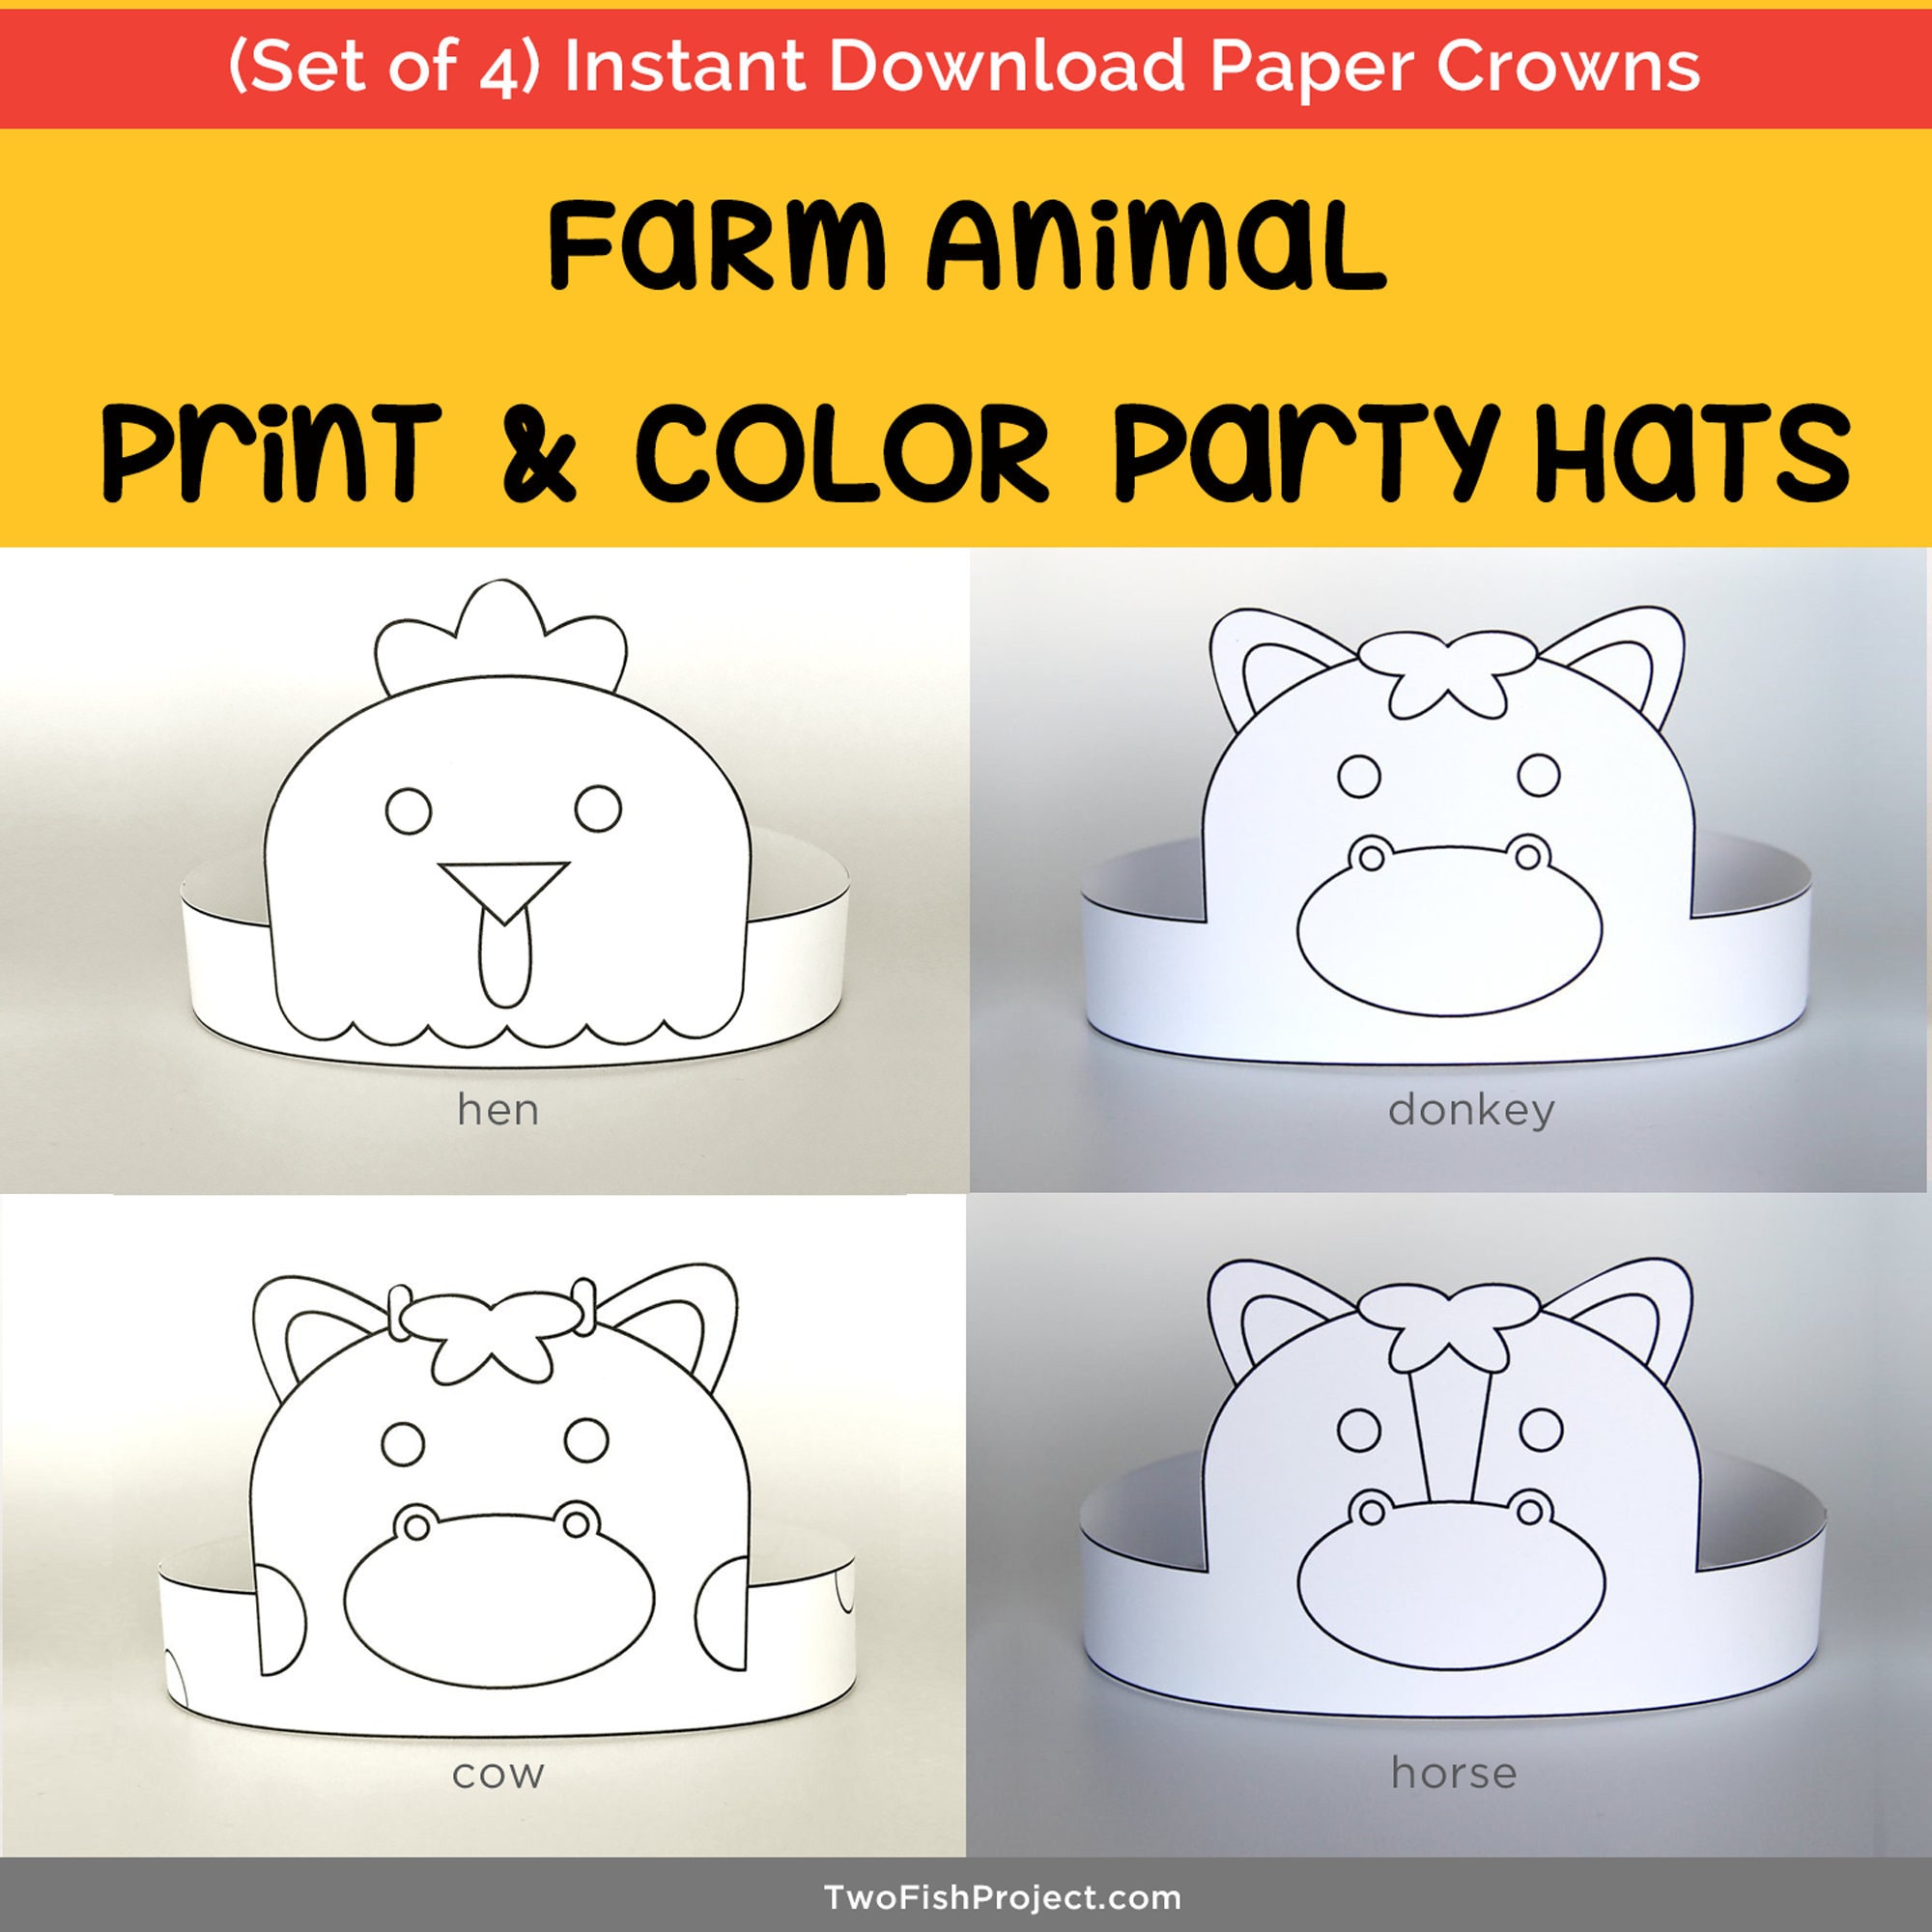 Color Your Own Farm Animal Masks - Craft Kits - 12 Pieces